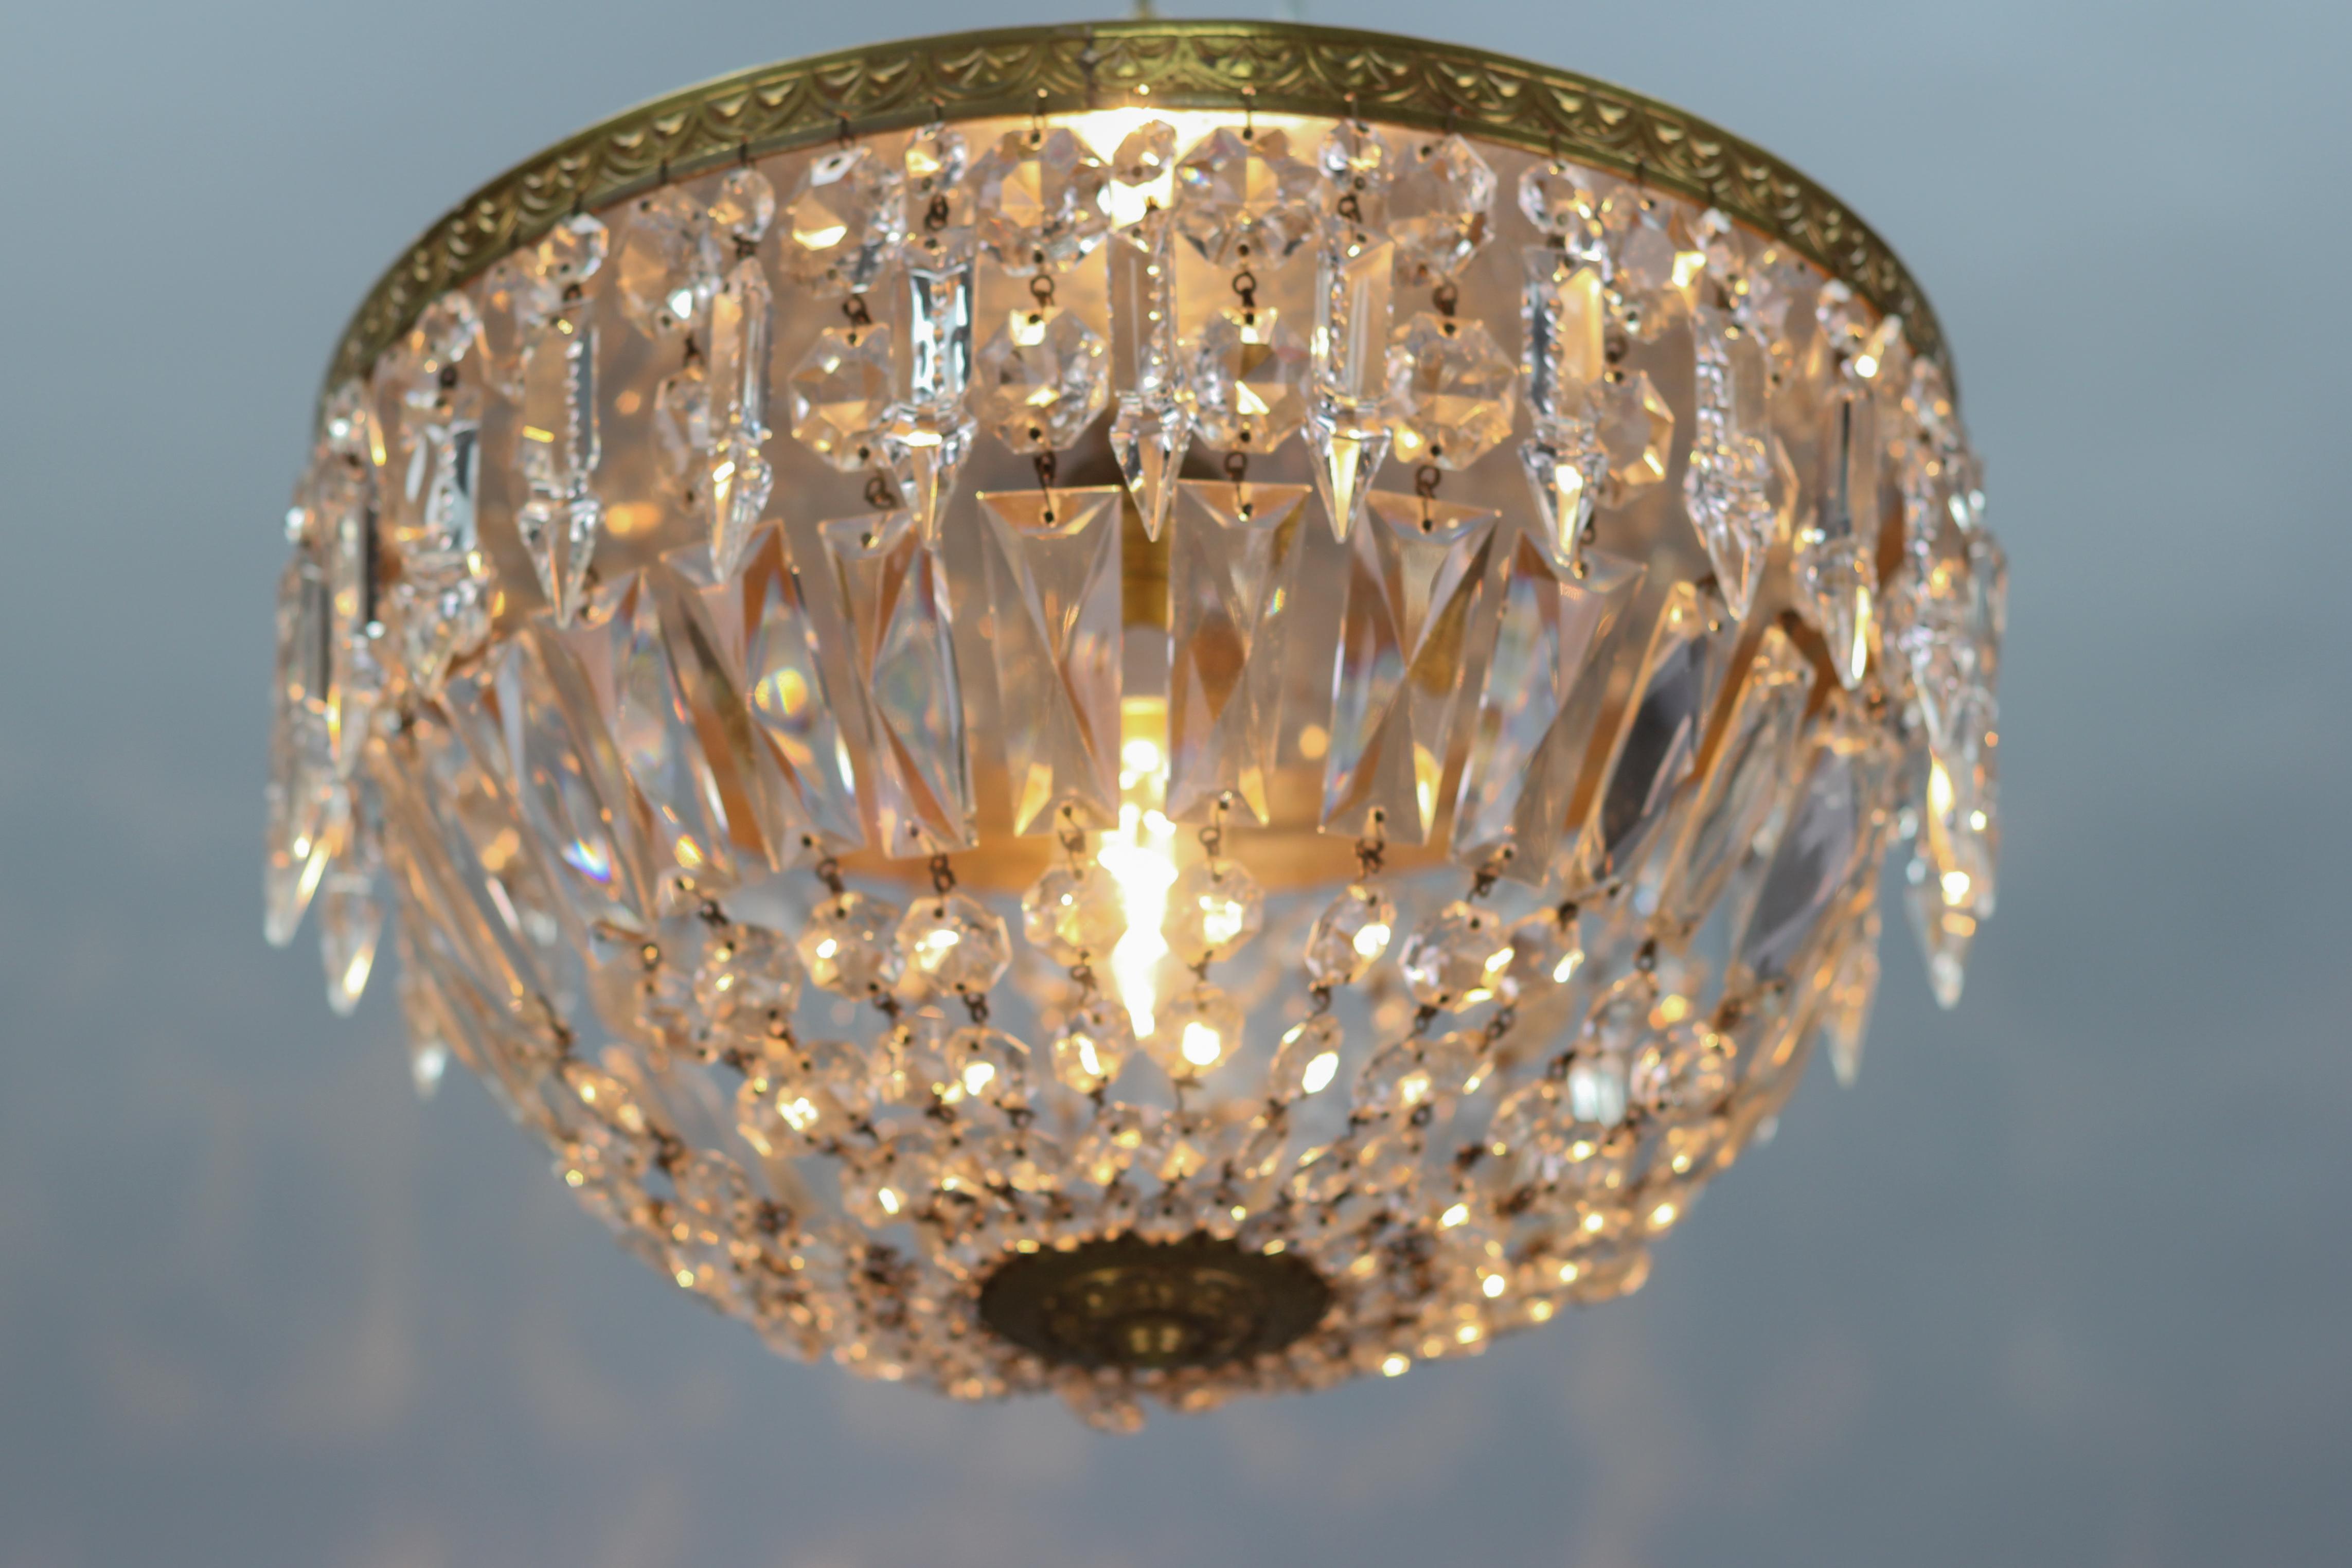 French Art Deco Style Crystal Glass and Brass Basket Ceiling Light Fixture 1